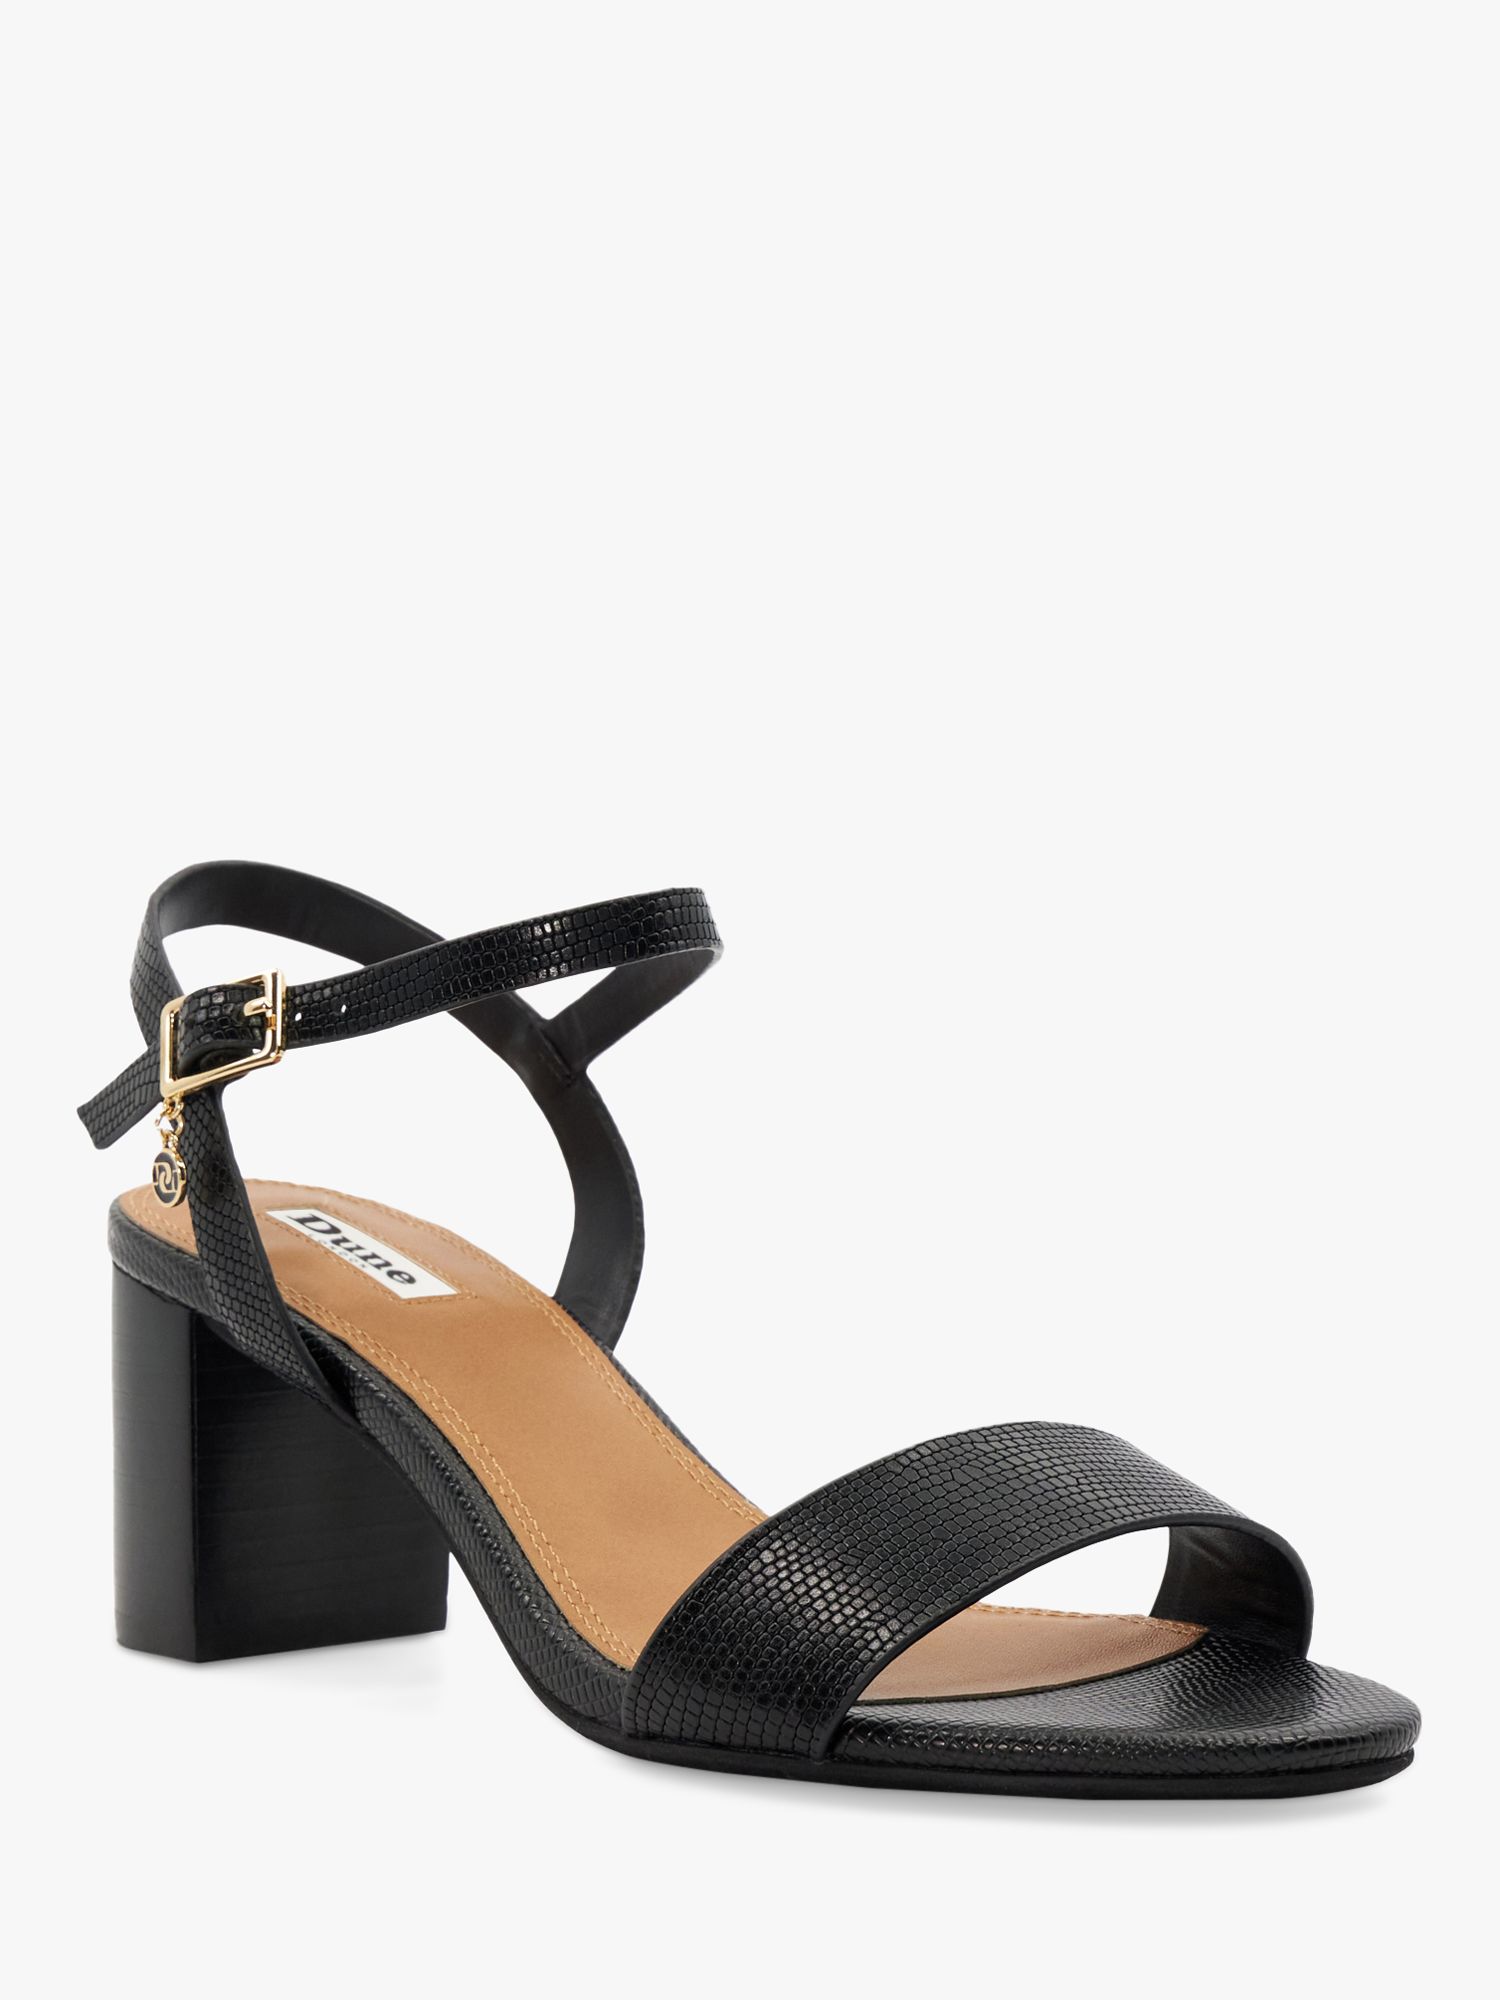 Dune Wide Fit Jelly Leather Block Heel Sandals, Black at John Lewis ...